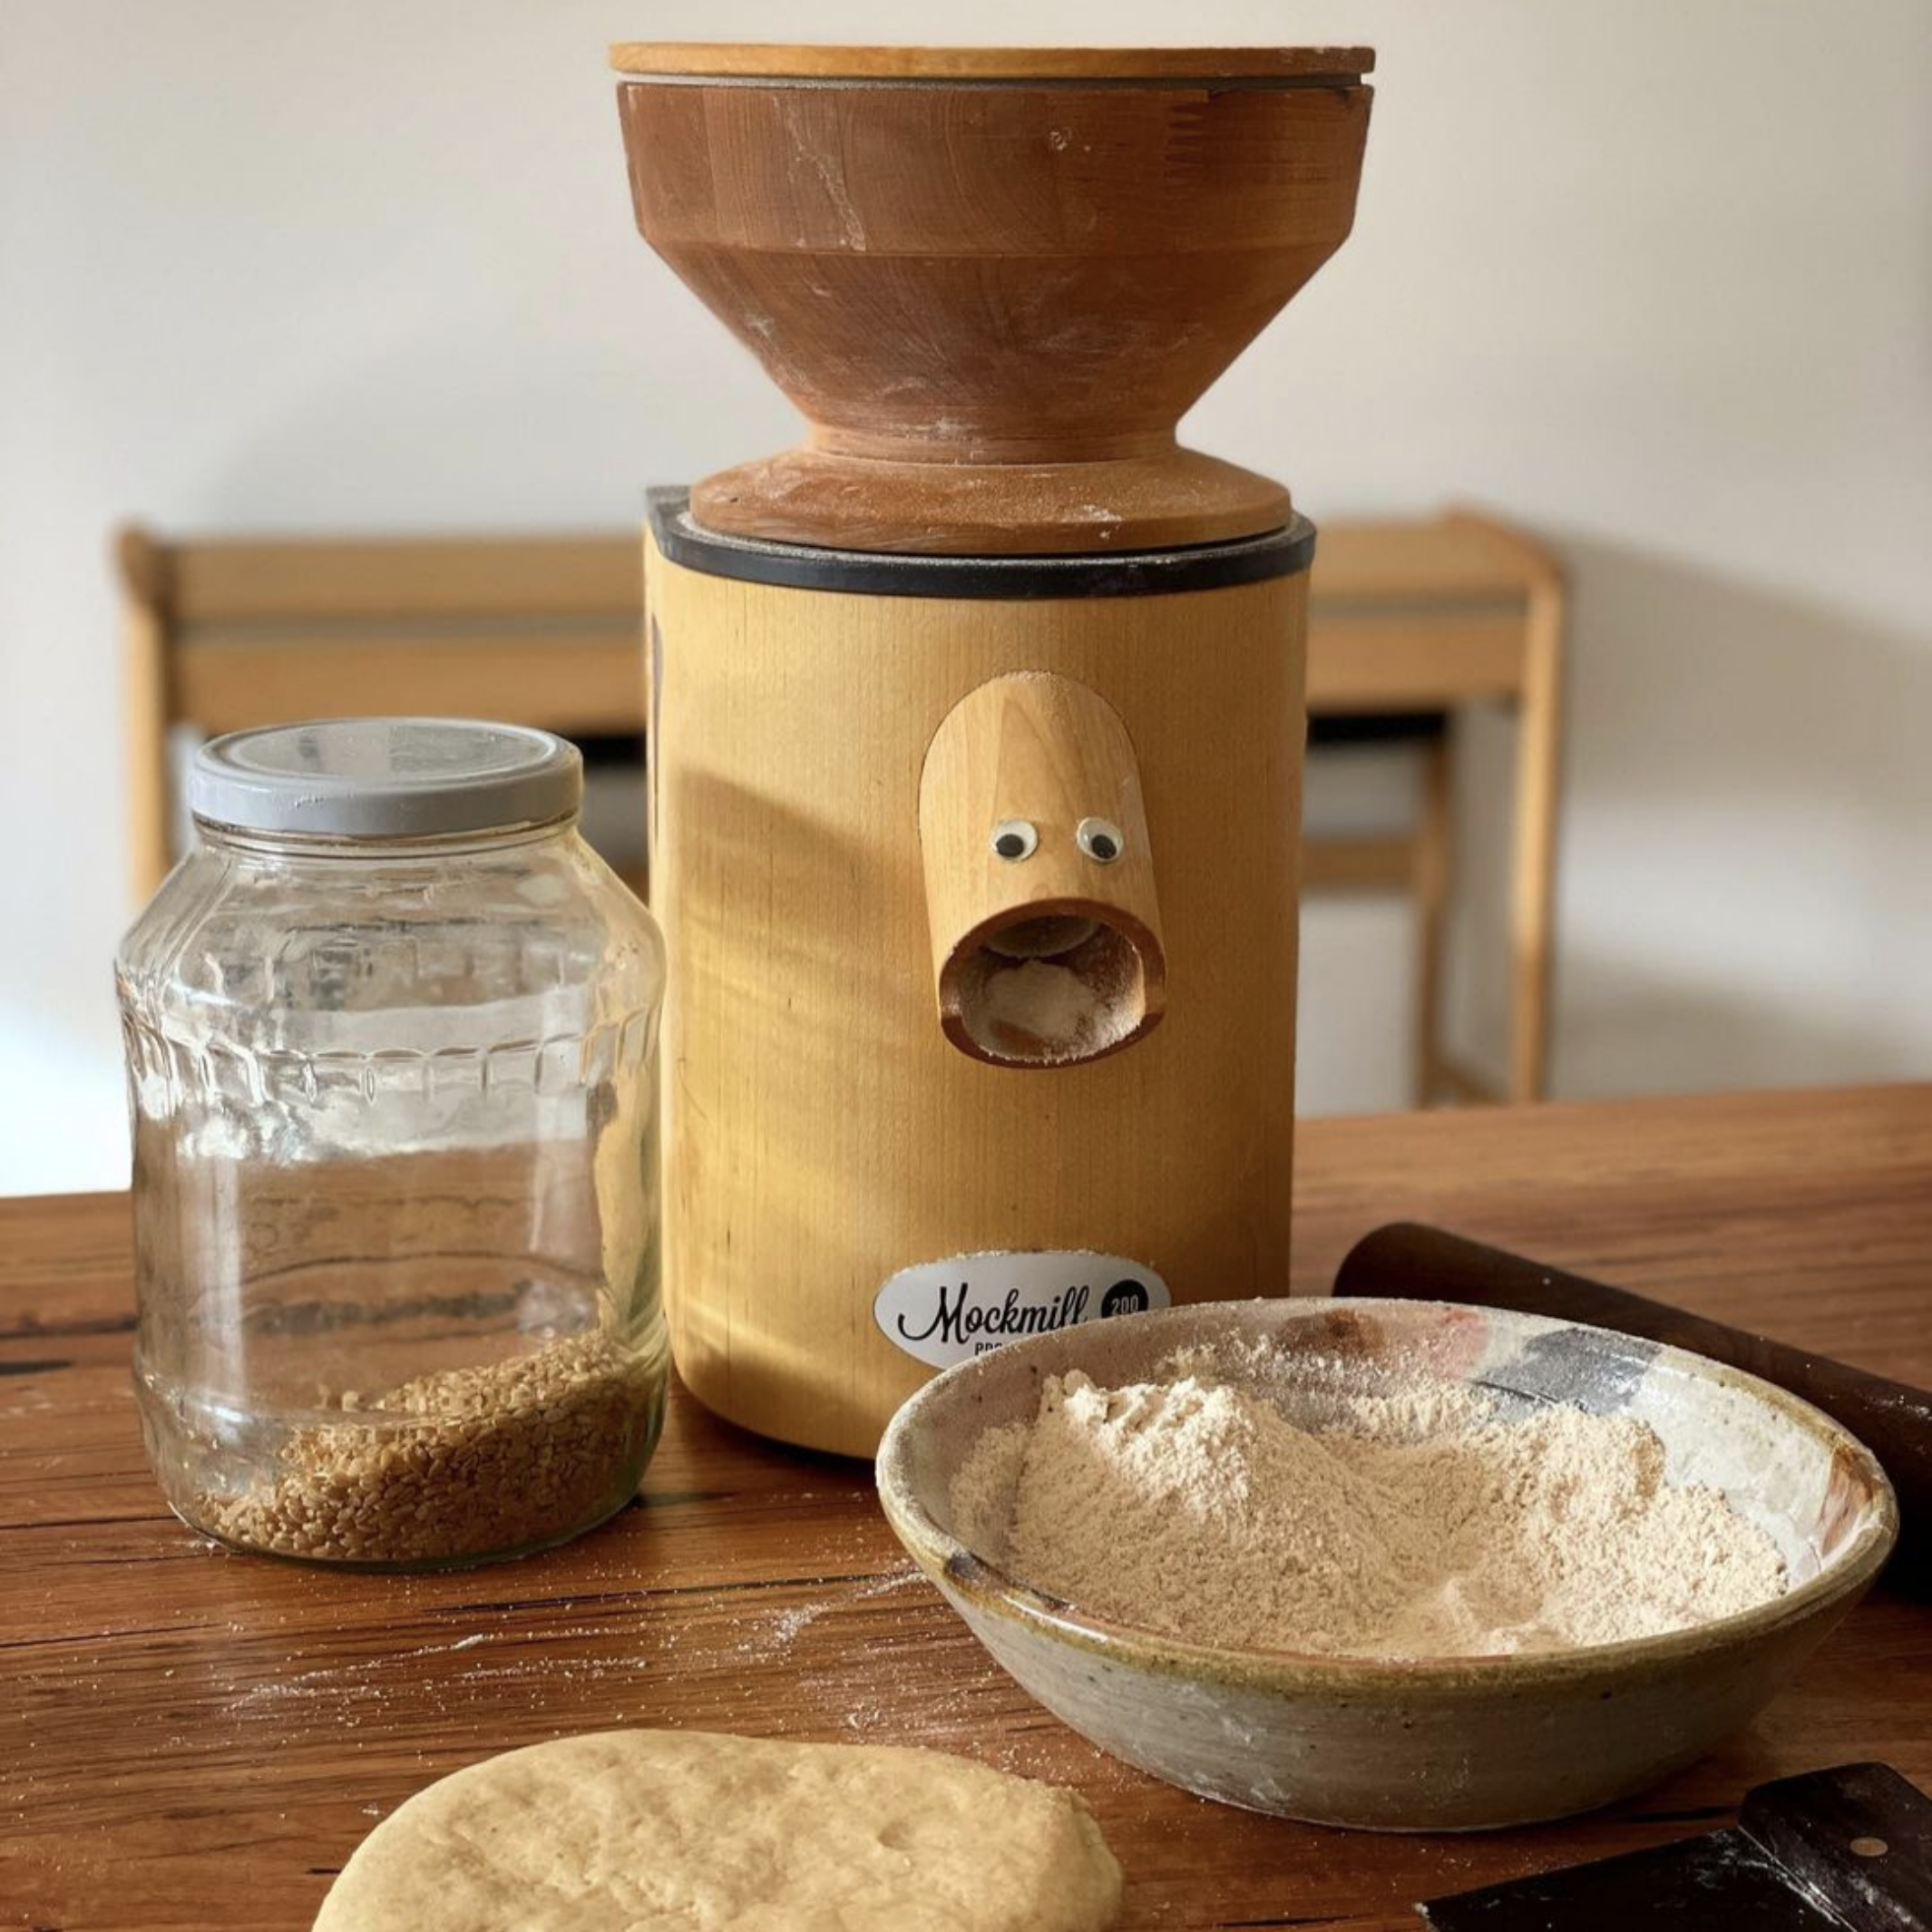 A Mockmill 200 PRO Professional MOCK wood wheat, grain, pulse, legume and spice personal mill sitting on a wooden table next to a jar of brown rice and a bowl of freshly milled brown rice flour and fresh dough